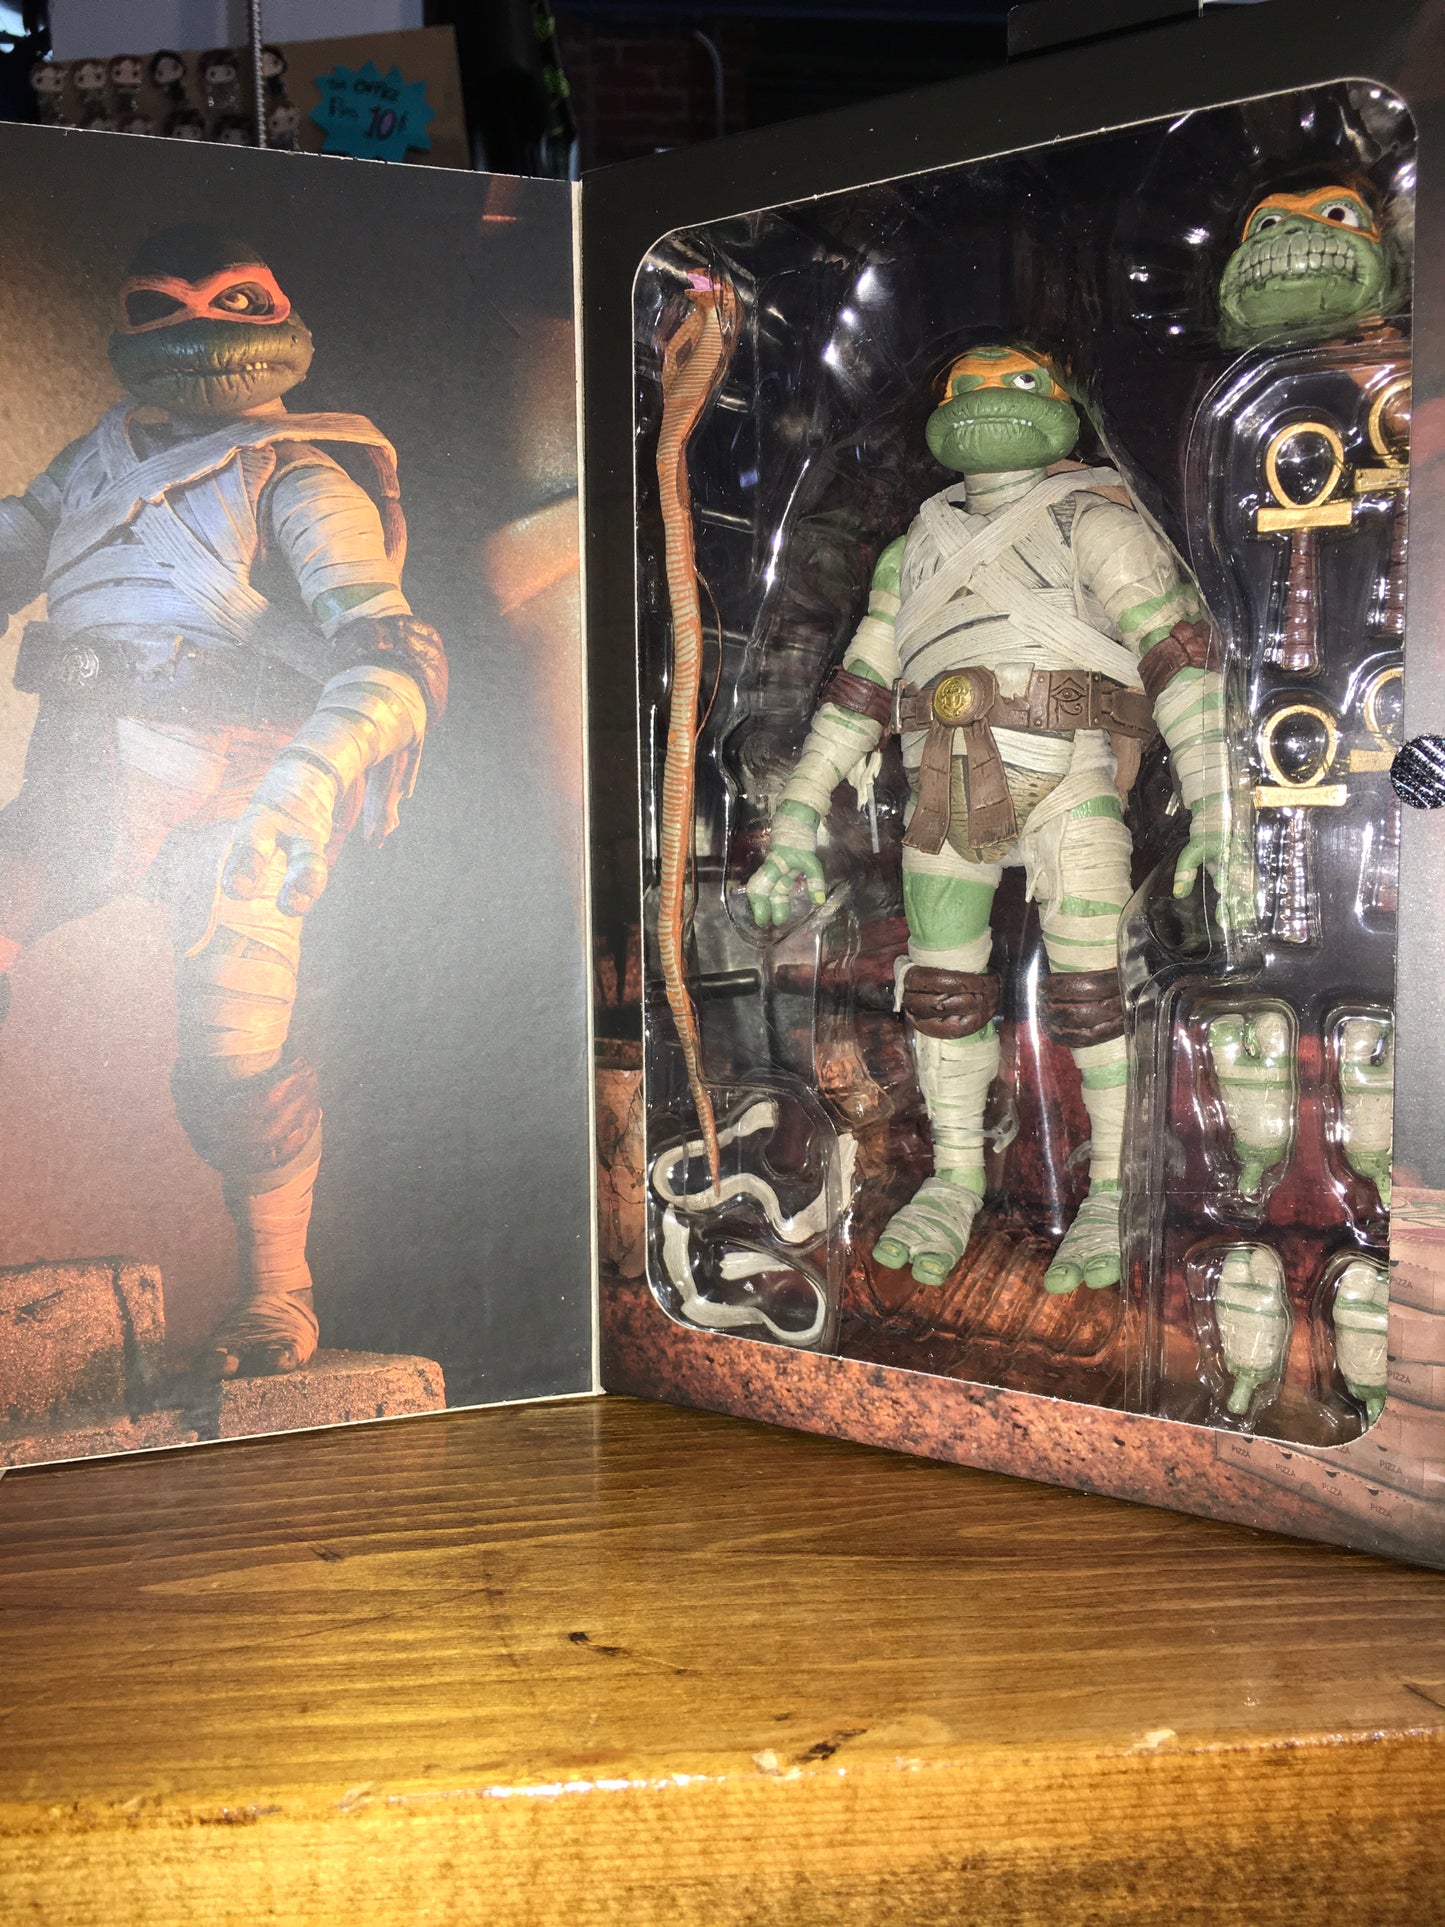 TMNT Universal Monsters The Mummy Michelangelo - Action Figure by Neca